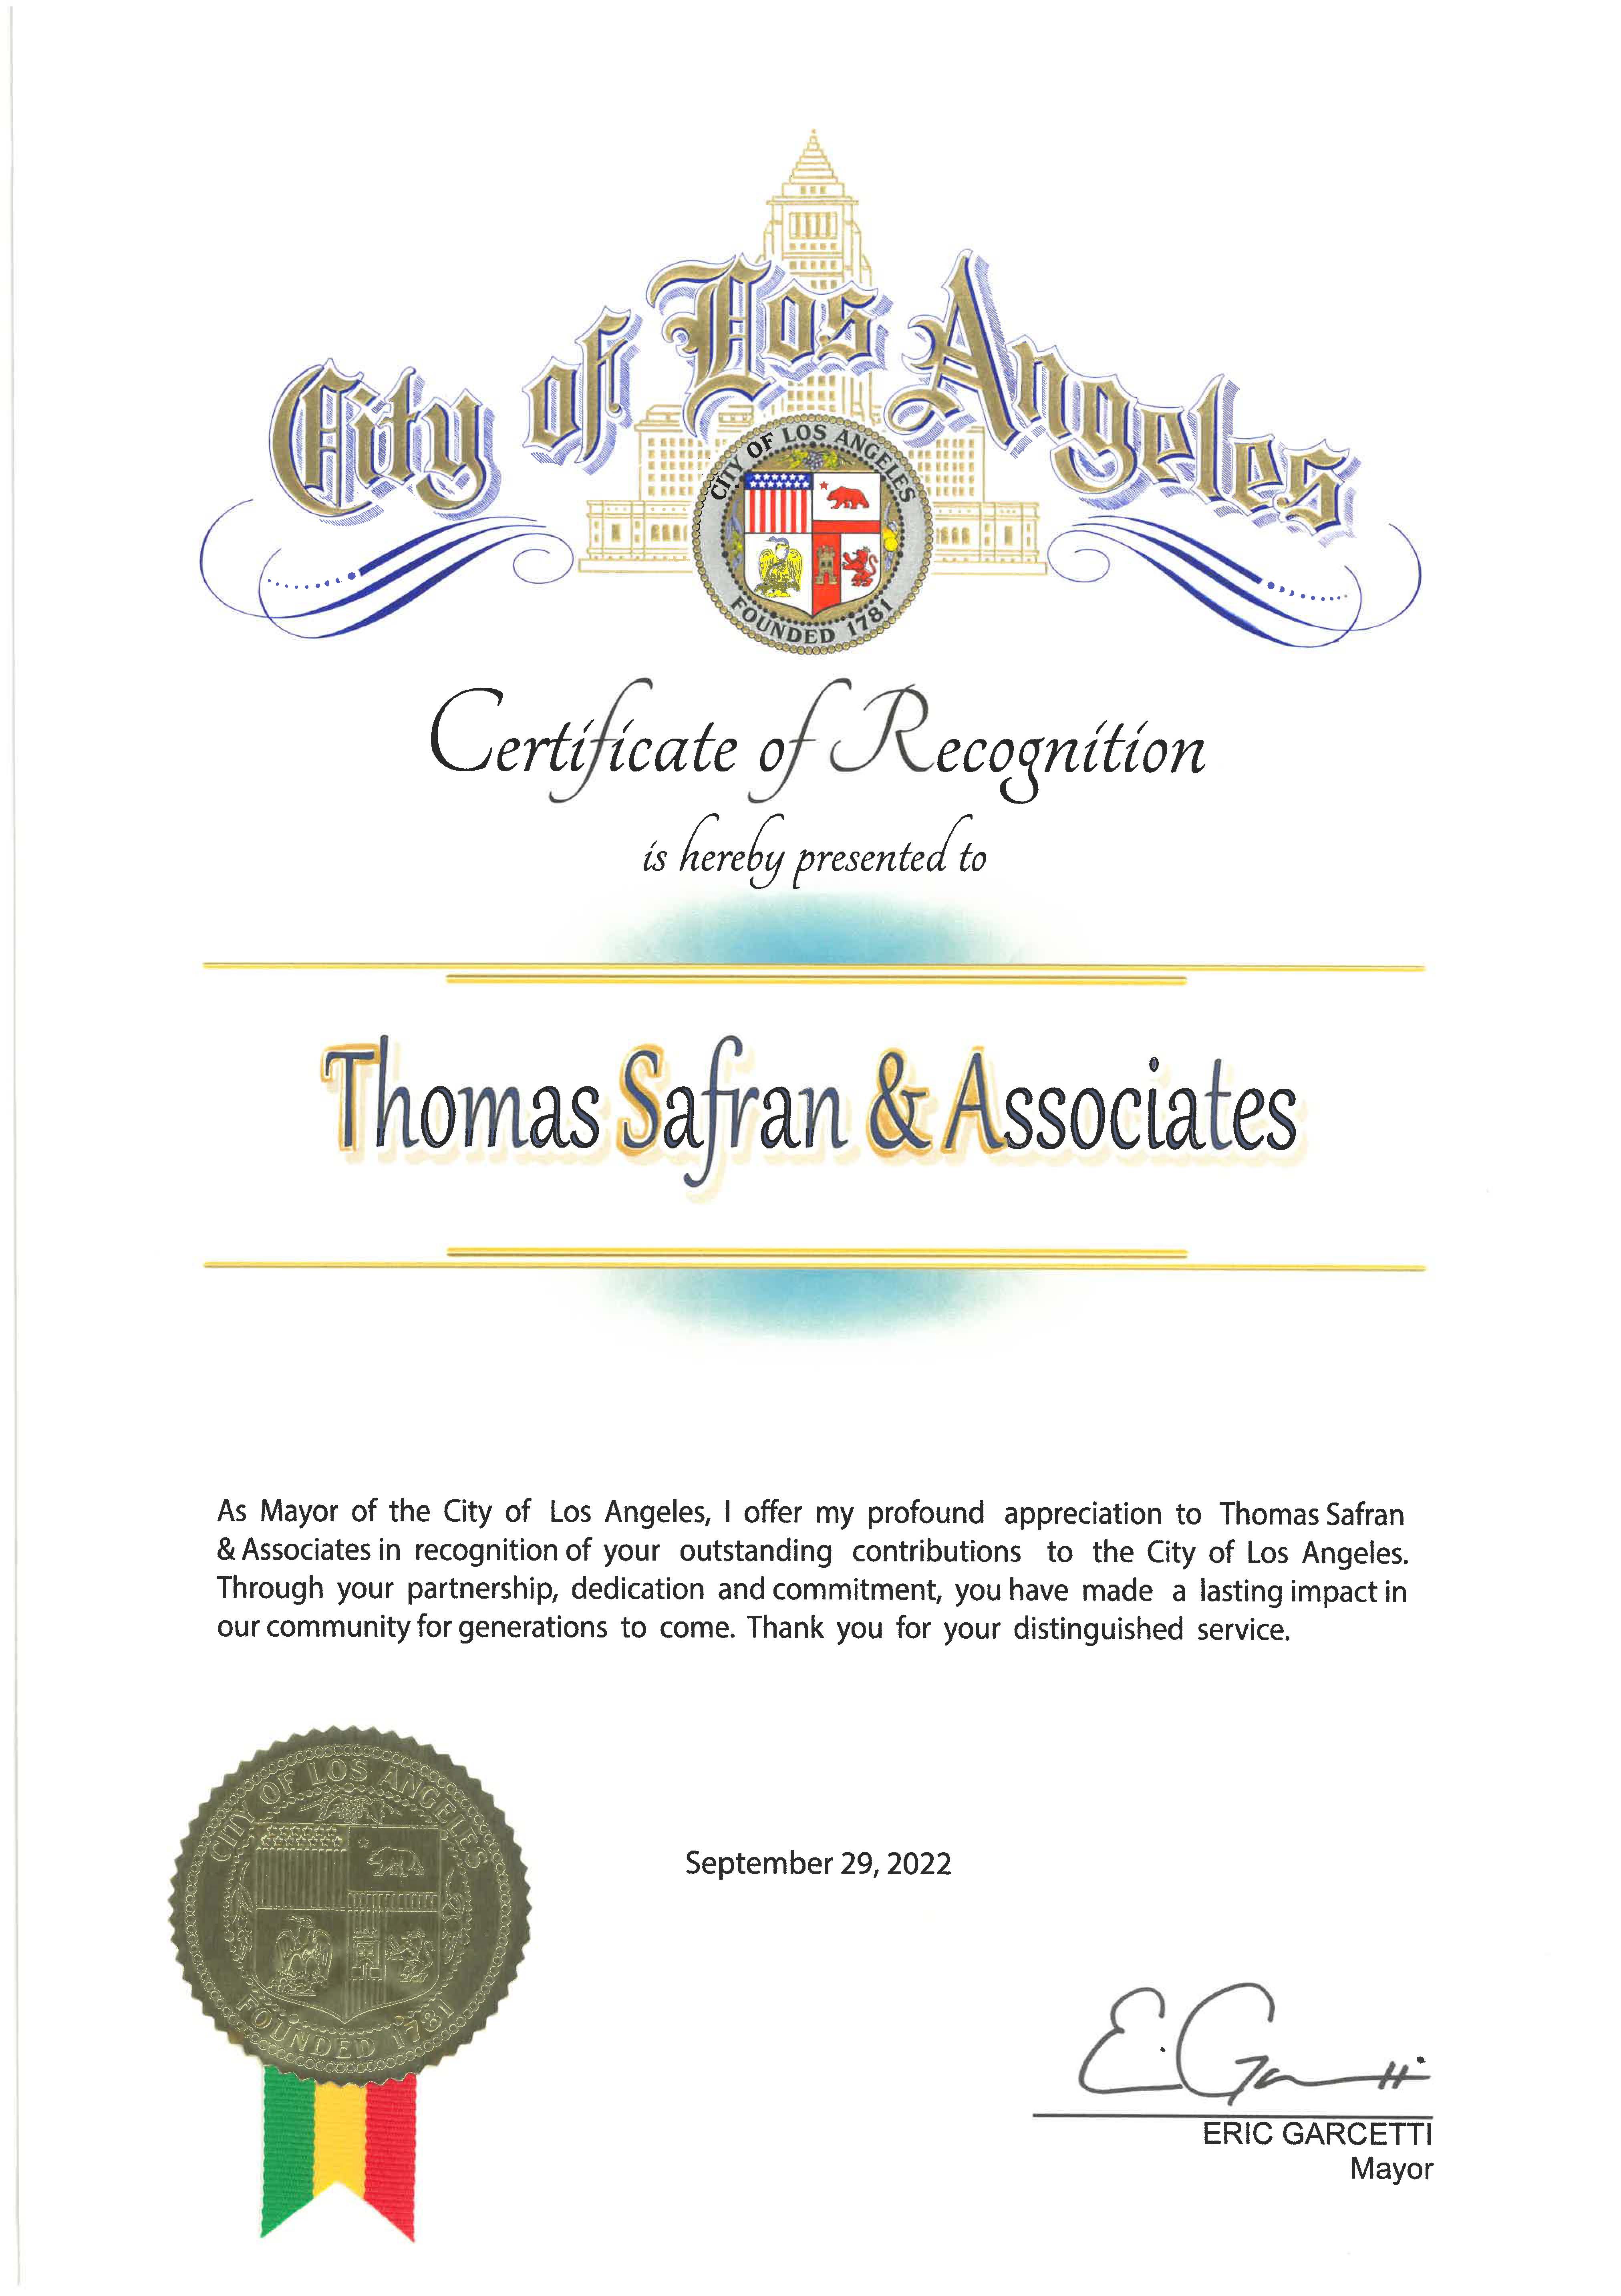 City of Los Angeles - Certificate of Recognition 2022 - 
Thomas Safran & Associates